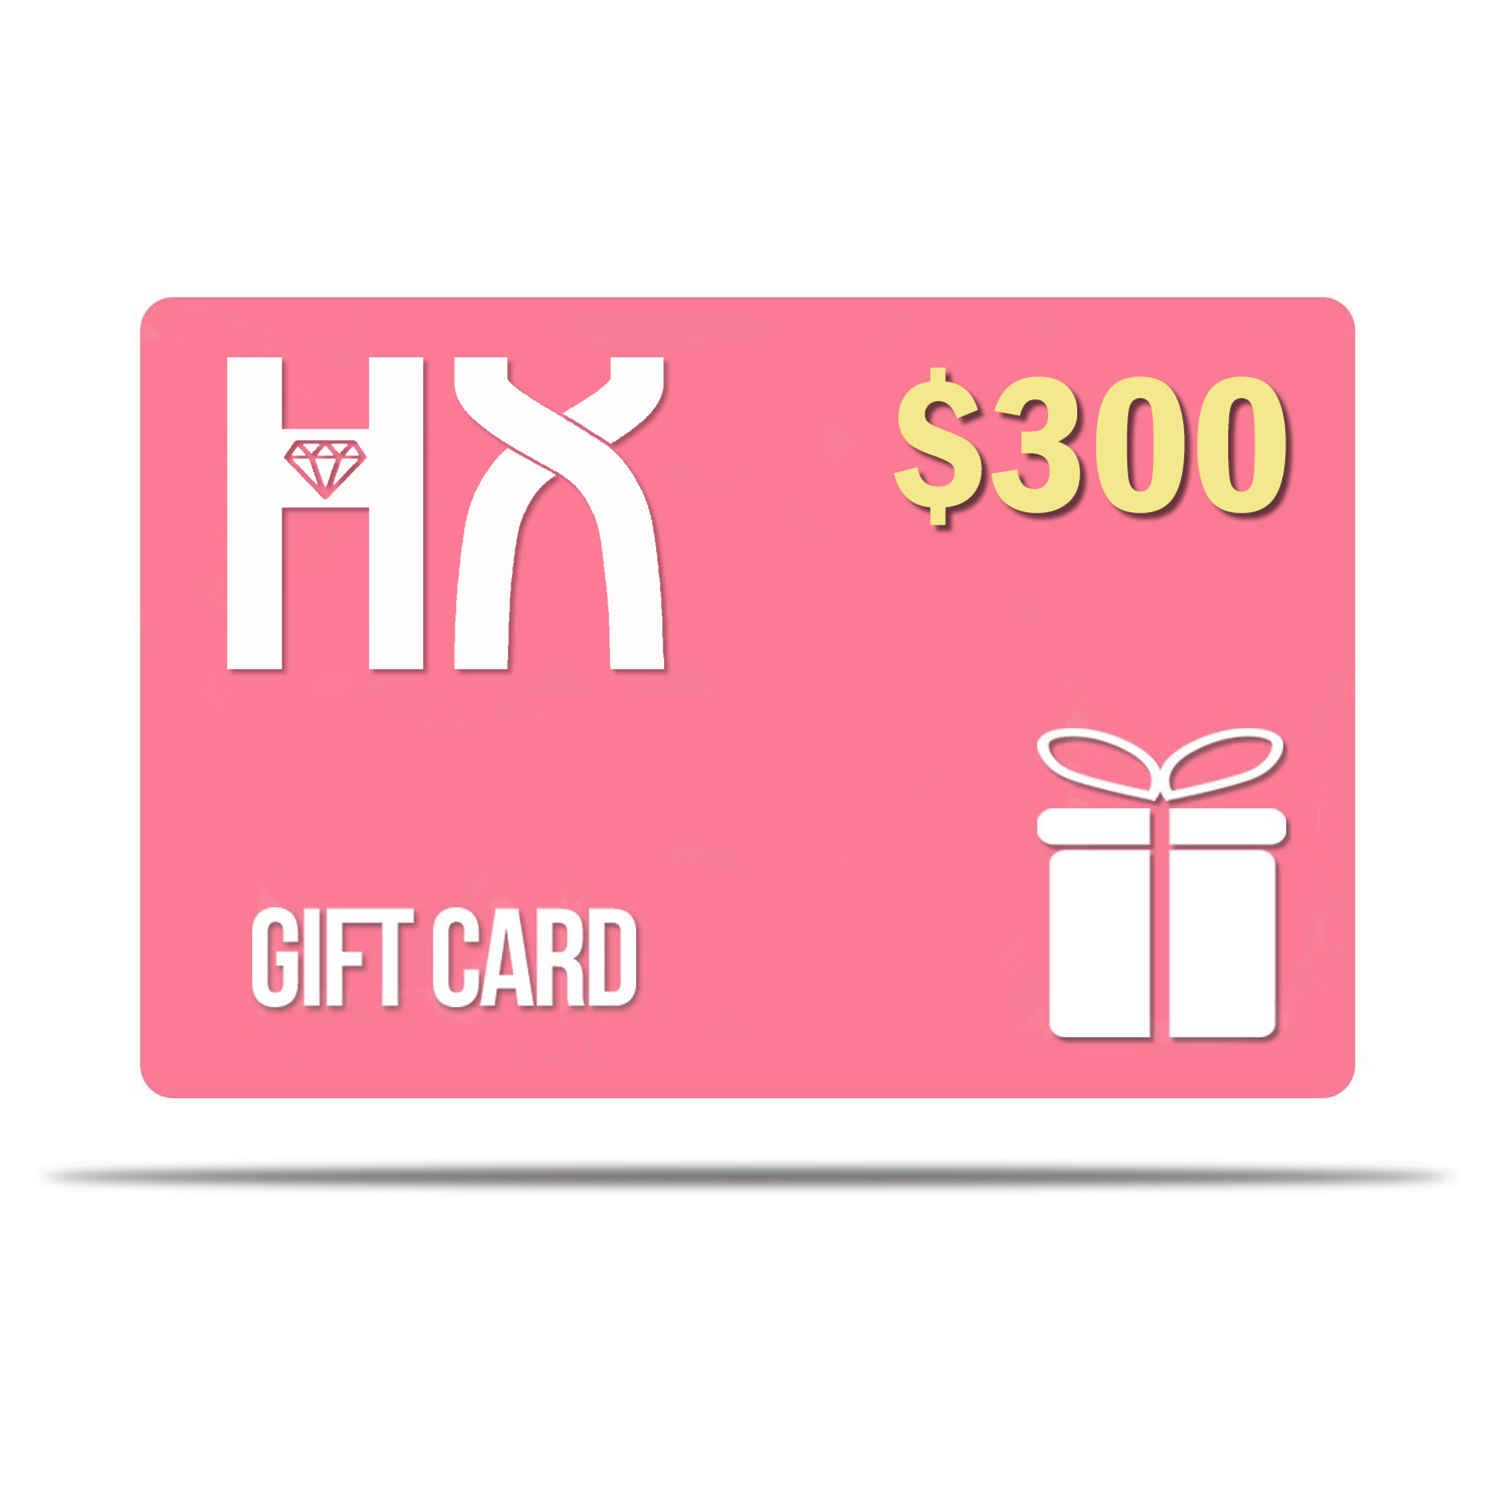 HX Discounted Gift Cards - Save up to 15%!